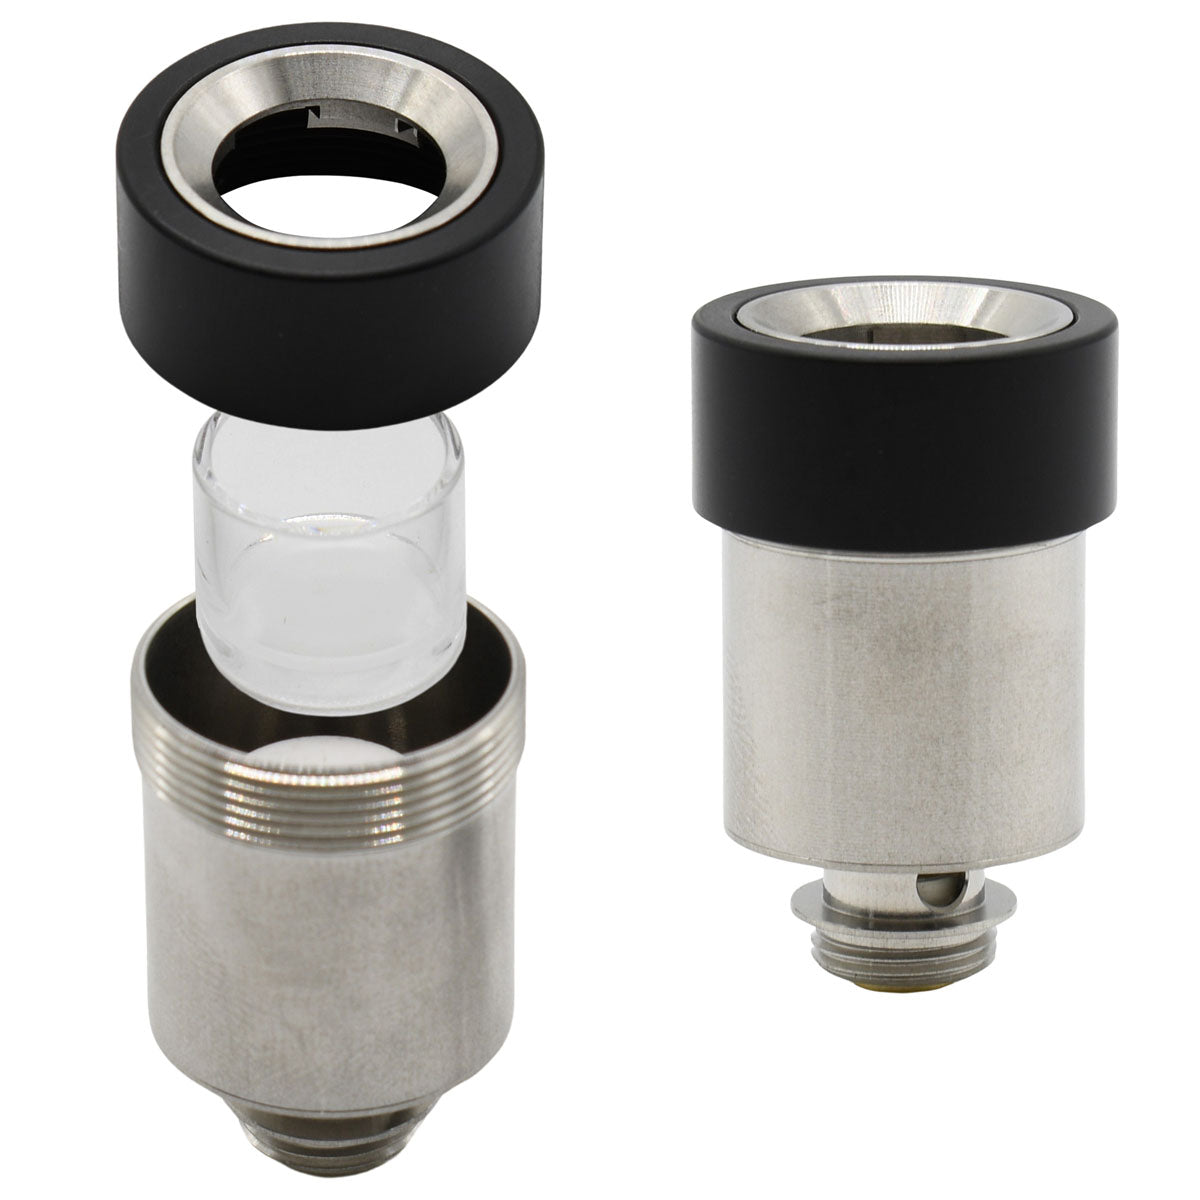 Wax Atomizer Replacement for Ripper E Rig for Dabs